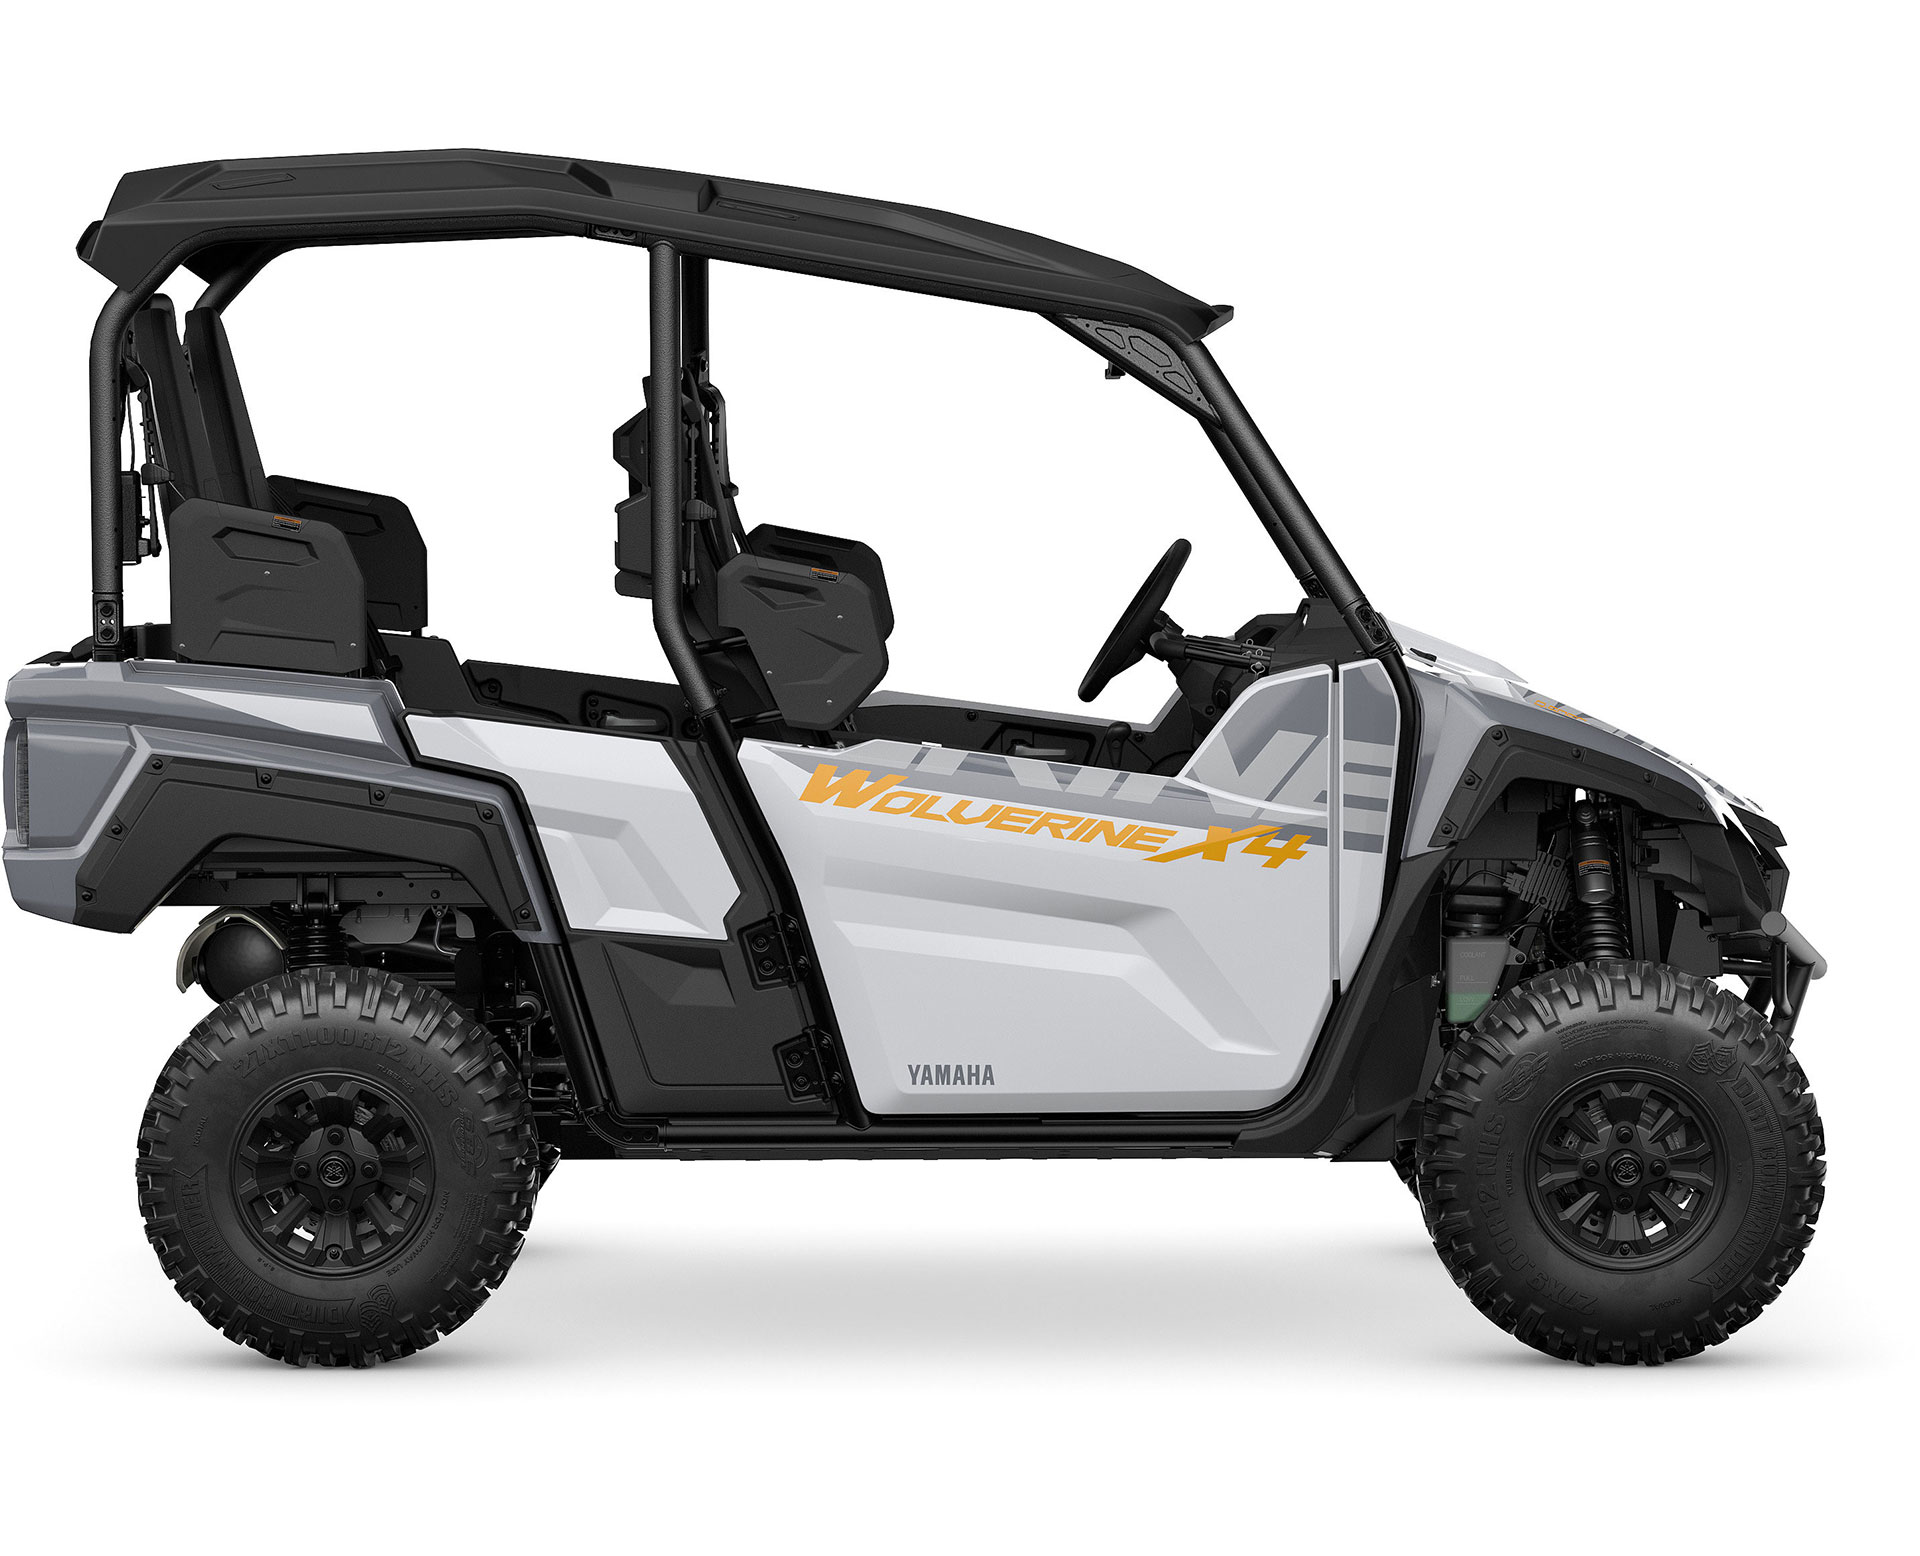 Thumbnail of your customized 2024 WOLVERINE® X4 850 R-Spec